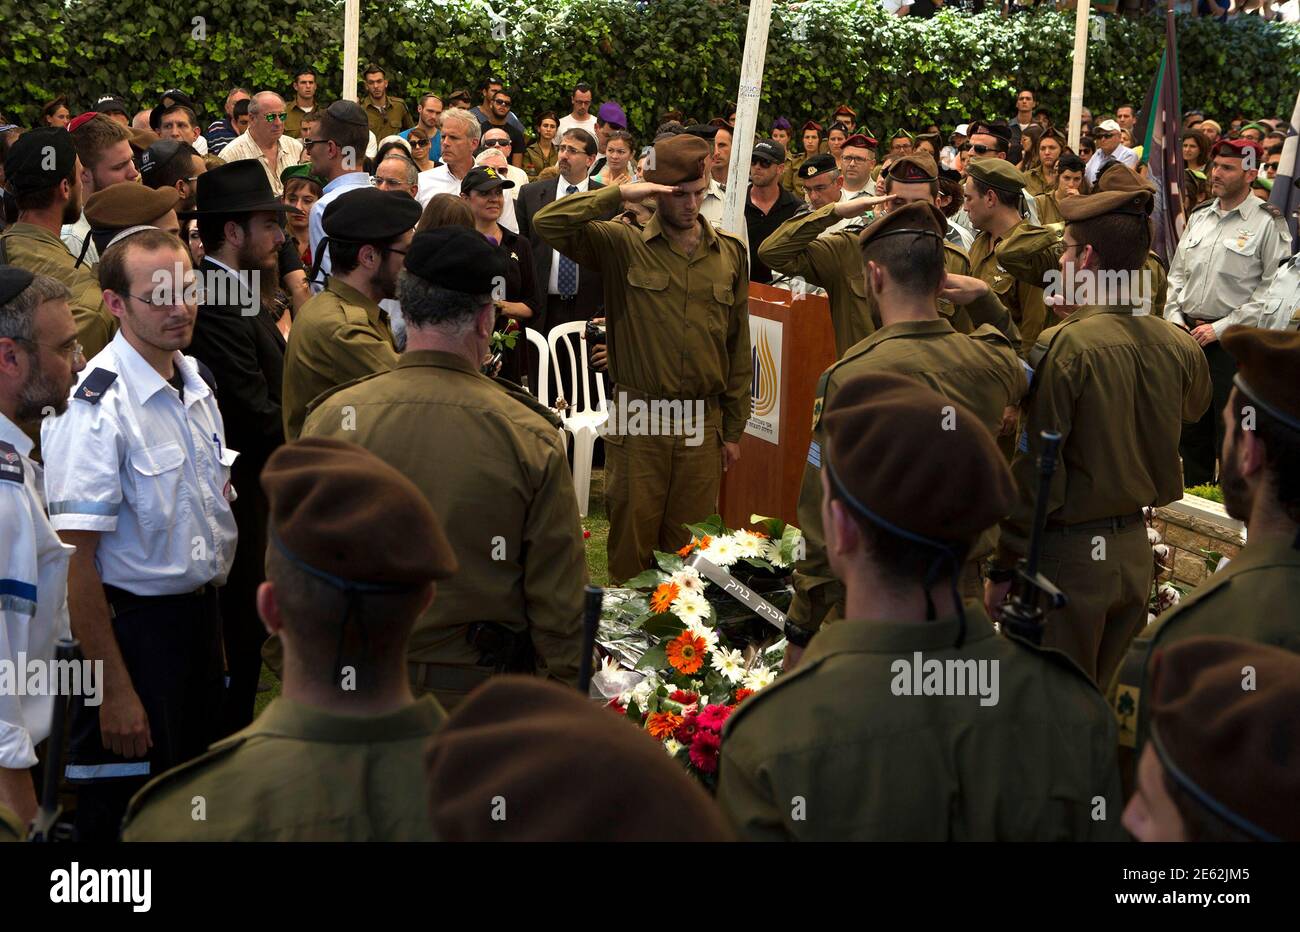 Israeli soldiers from the Golani Brigade salute beside the grave of their fallen comrade Max Steinberg during his funeral at Mount Herzl military cemetery in Jerusalem July 23, 2014. Steinberg, a 23 year-old American from California's San Fernando Valley, was among 13 Israeli Defense Forces soldiers killed on Sunday during fighting in Gaza. REUTERS/Siegfried Modola (JERUSALEM - Tags: CONFLICT POLITICS CIVIL UNREST MILITARY) Stock Photo